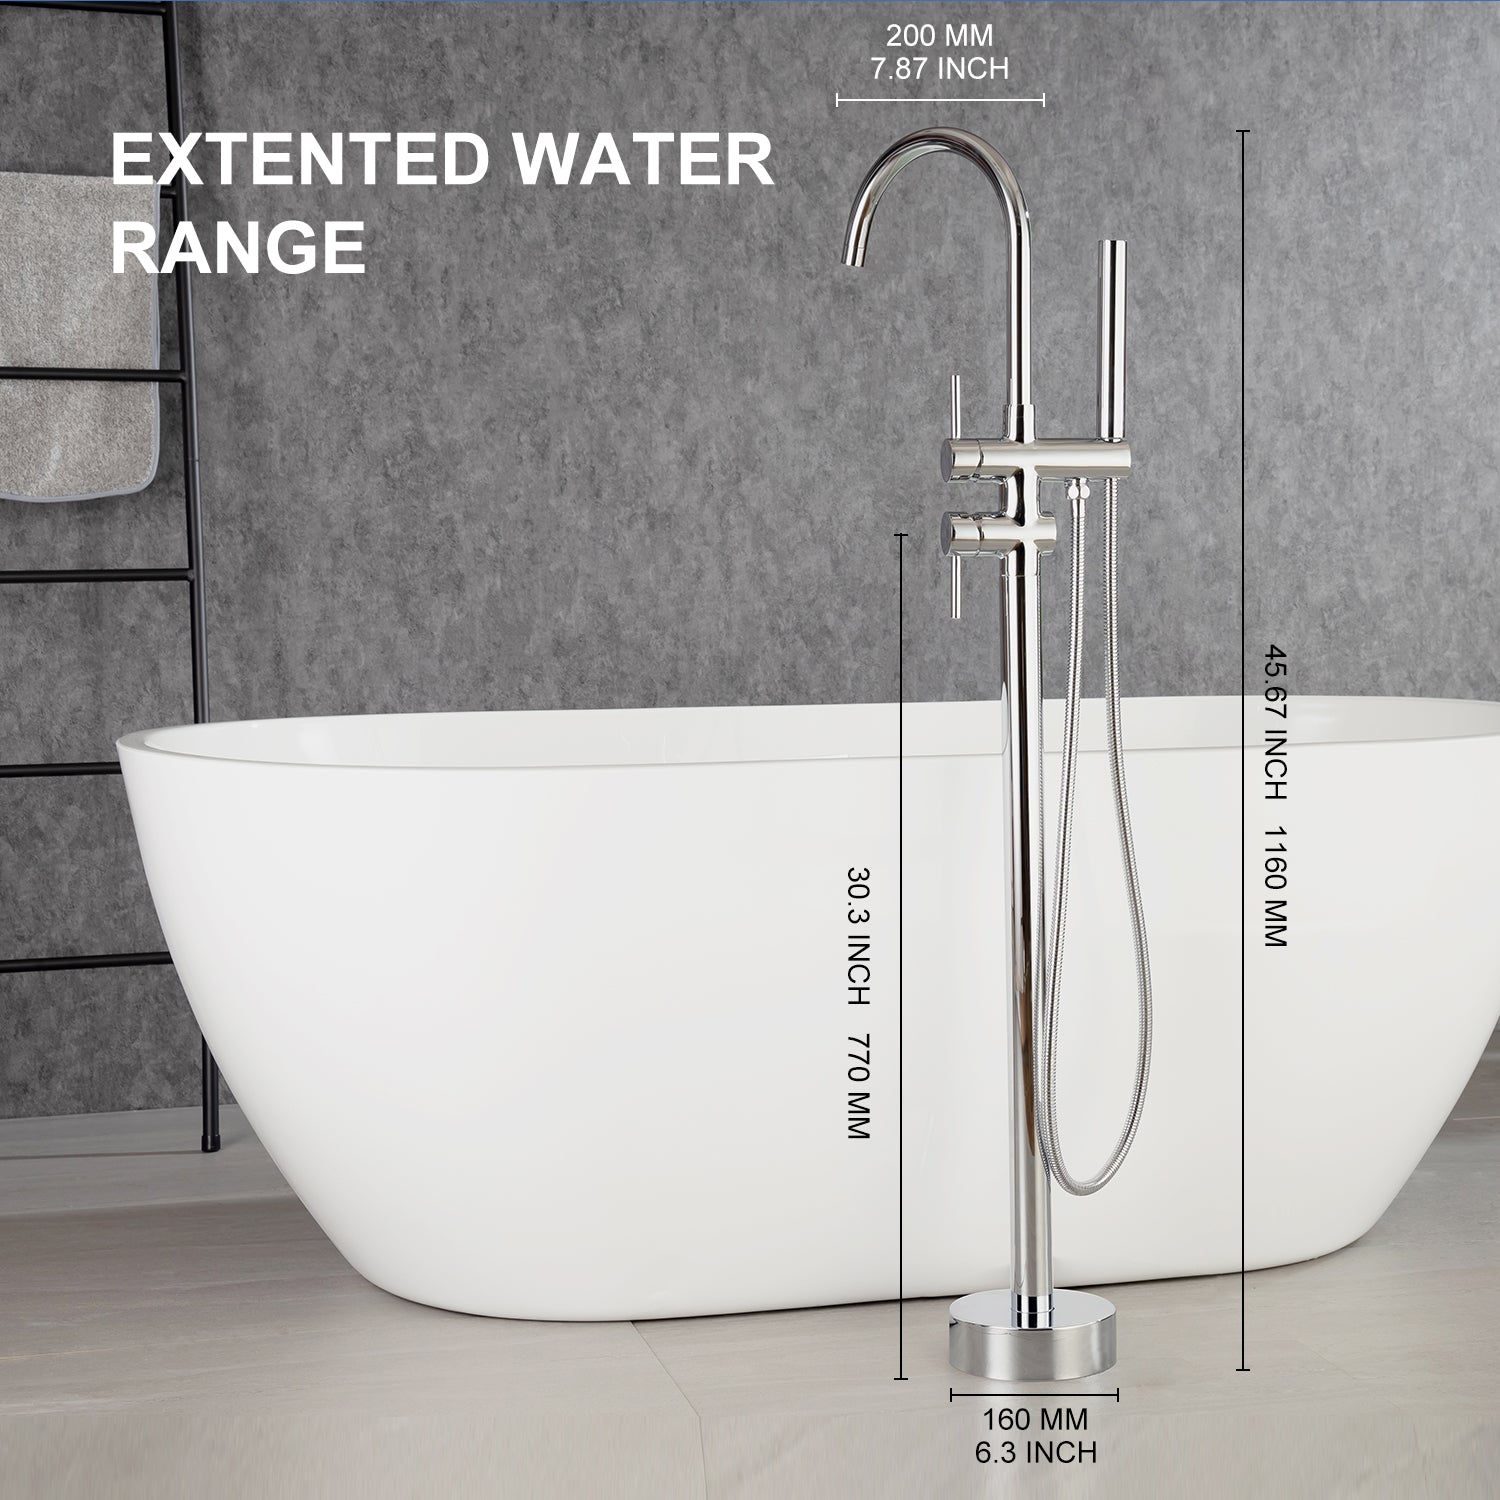 Lexia Freestanding Tub Faucet with Hand Shower